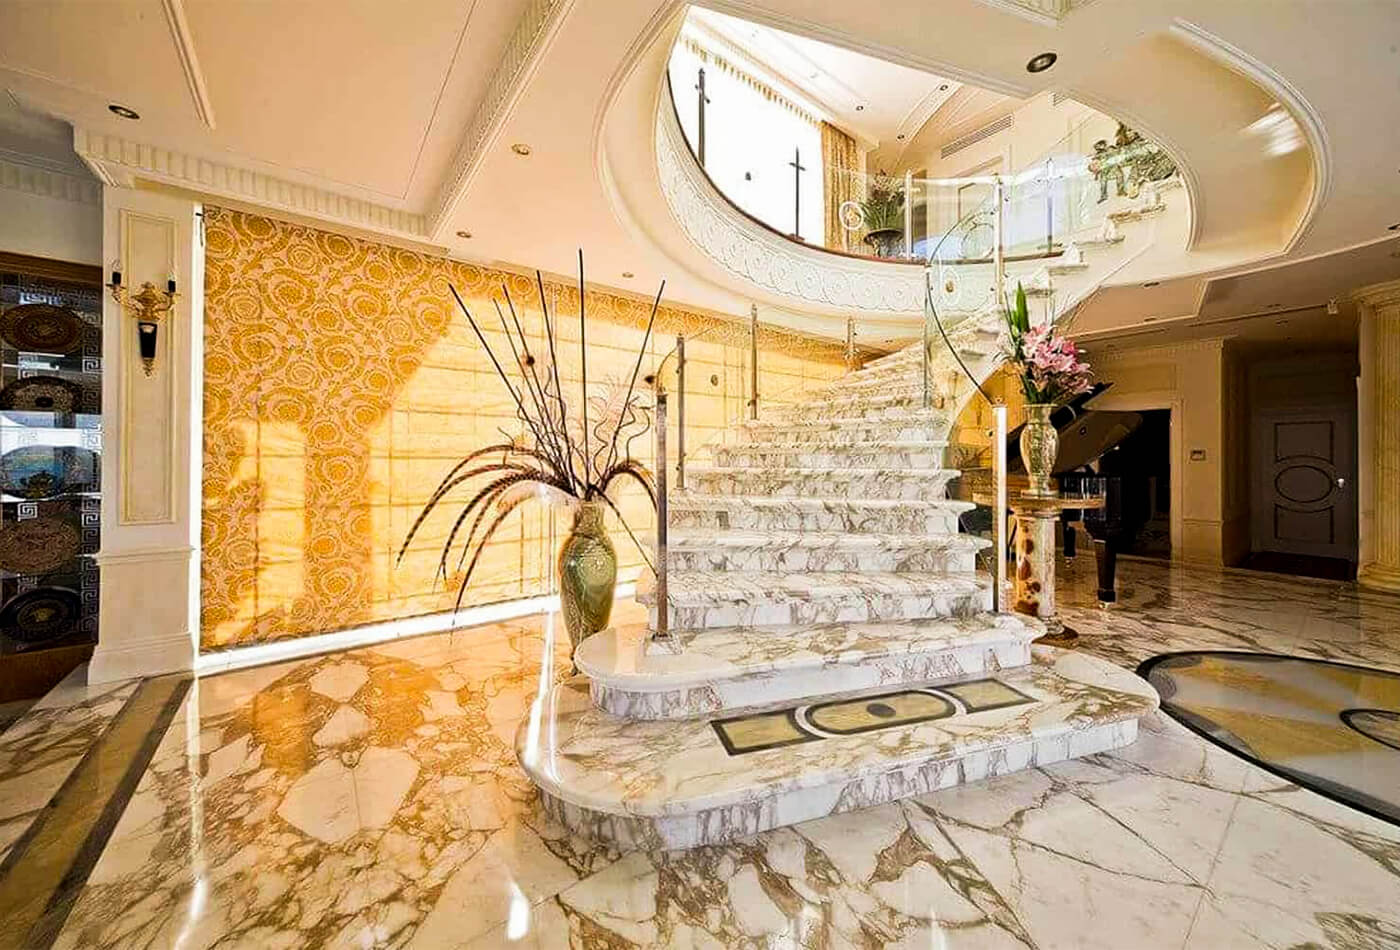 Creative Staircase Design Idea For Your Home's Elegant Entry